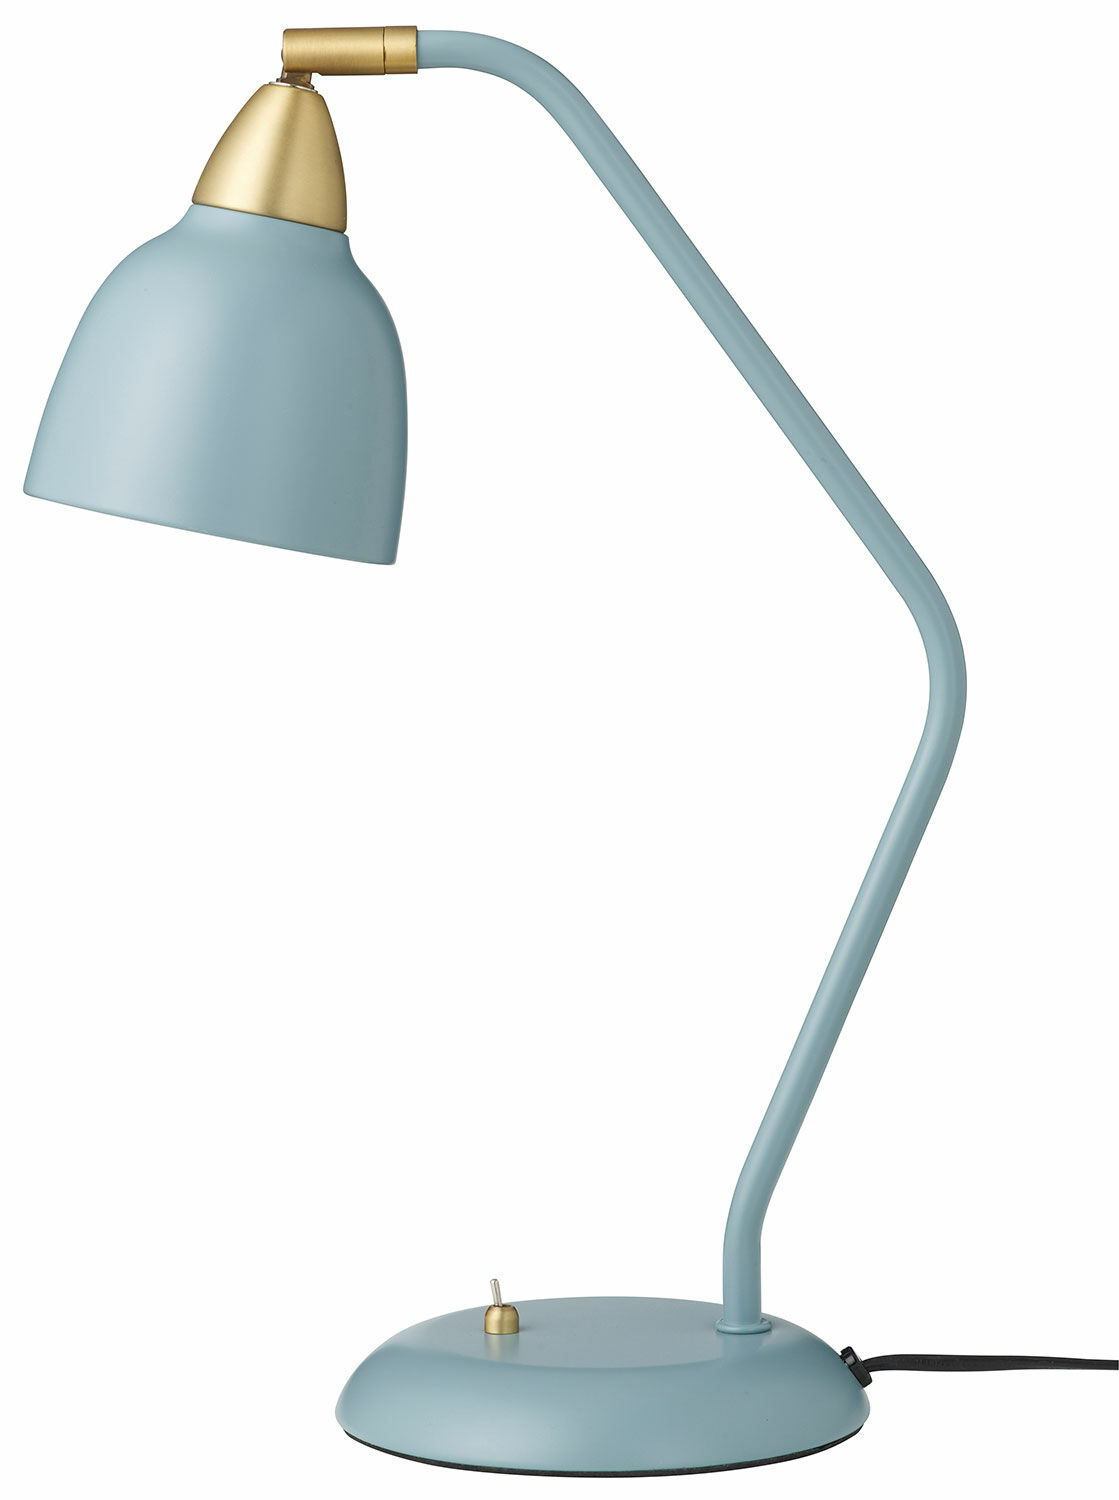 Table lamp "Urban Mineral Blue" by Superliving